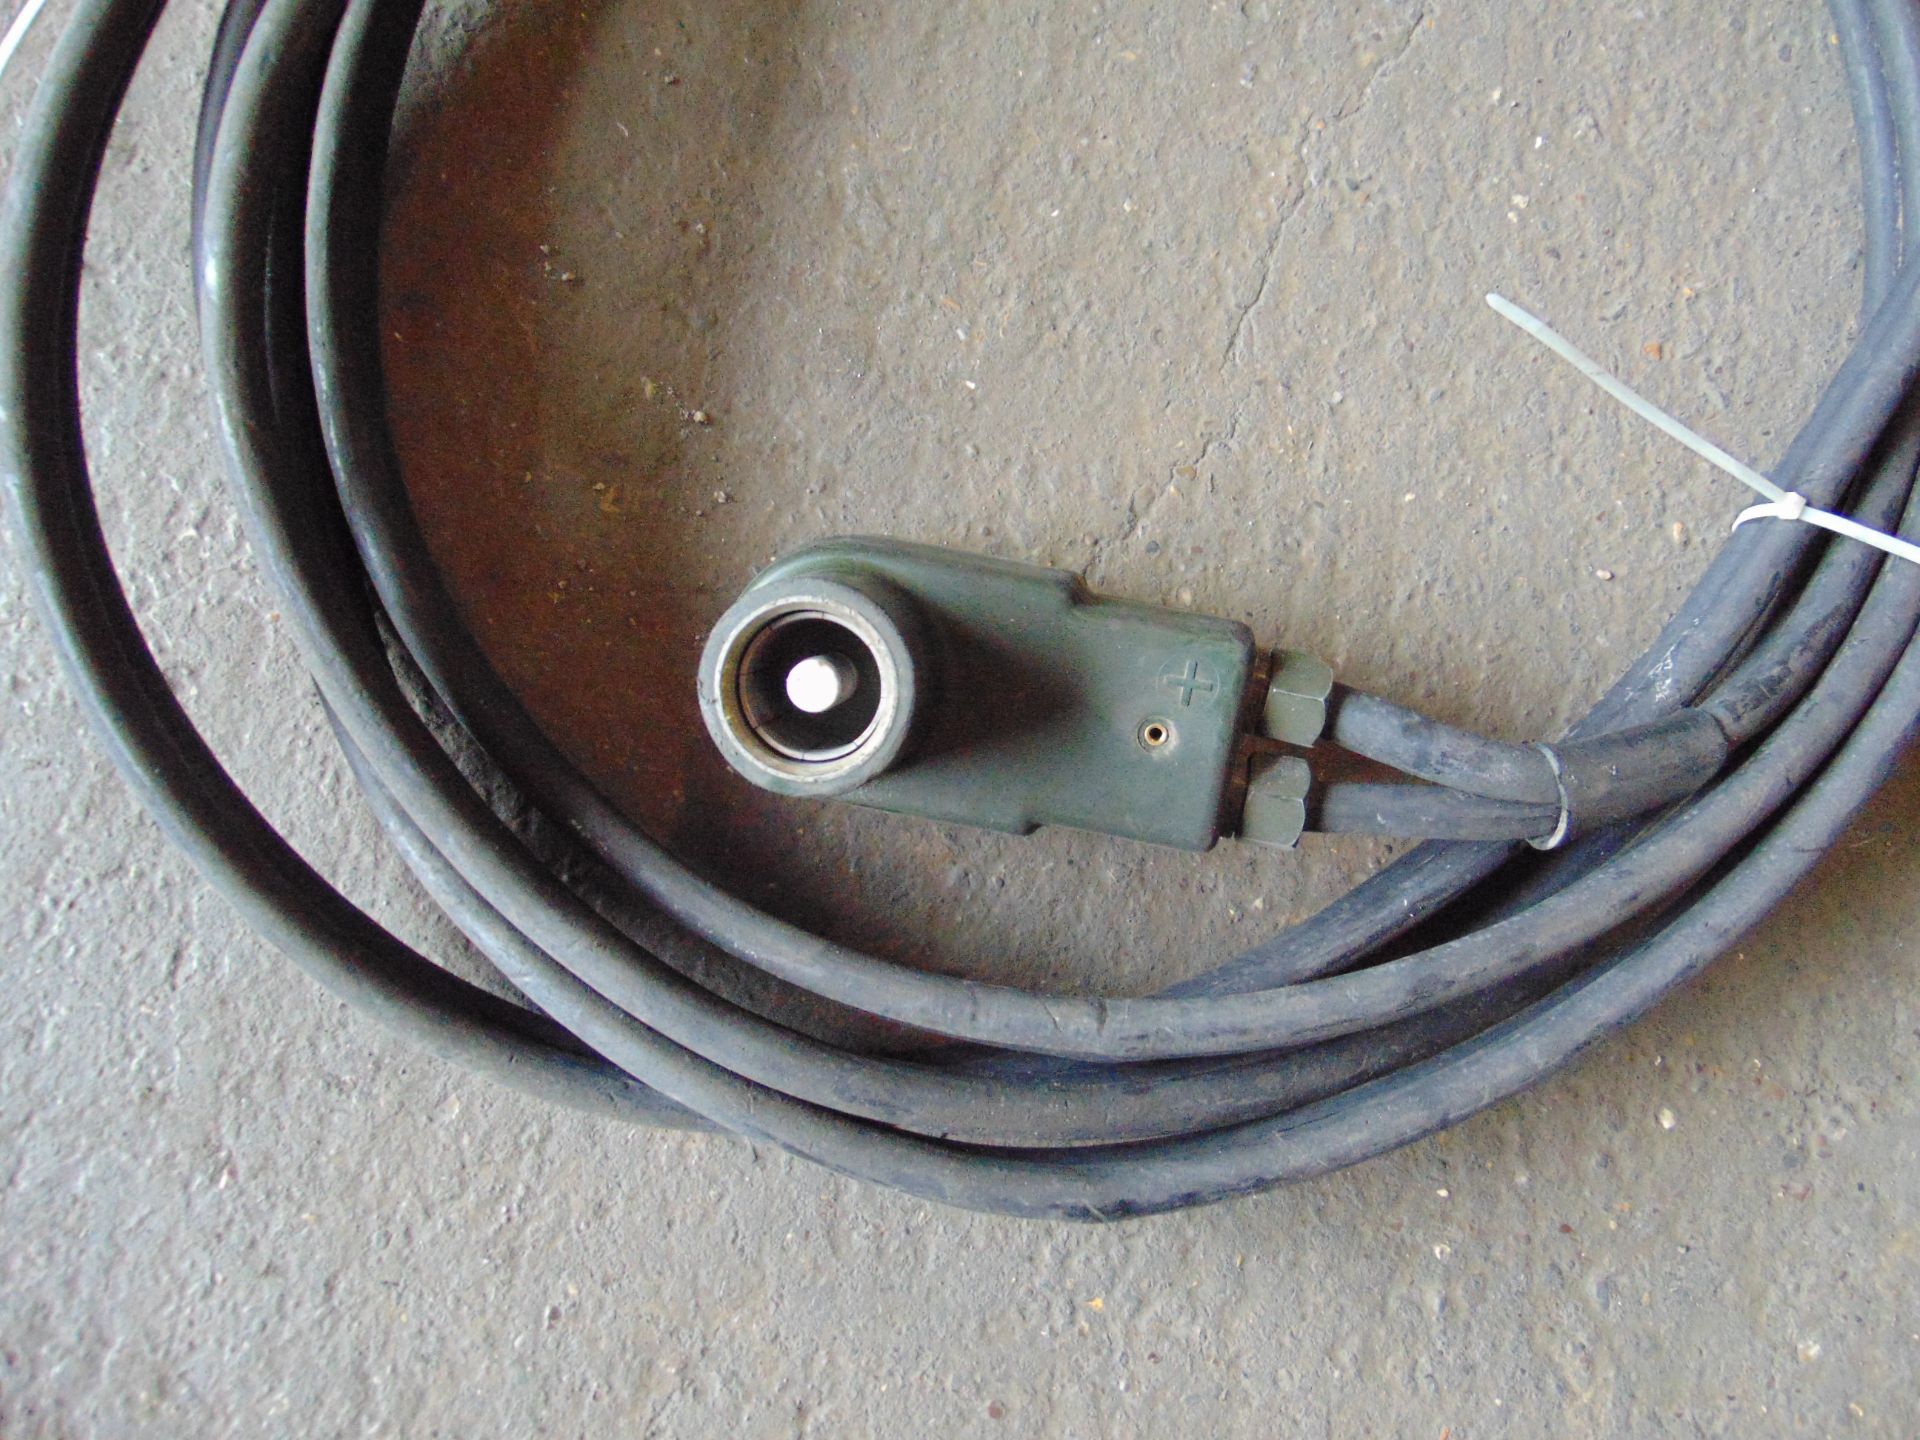 NATO Vehicle Jumper Cable - Image 3 of 4